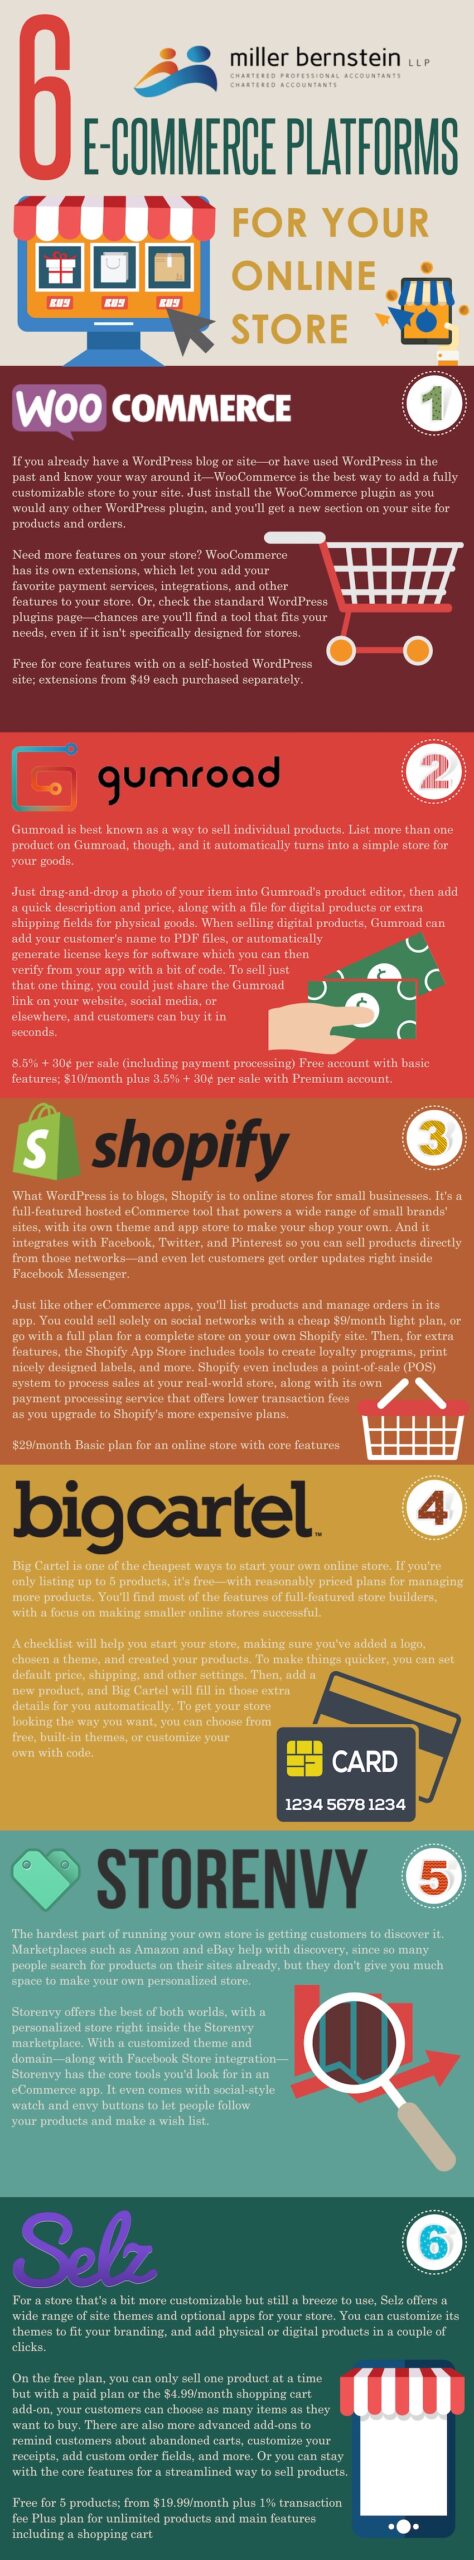 6 ECommerce Platforms For Your Online Store